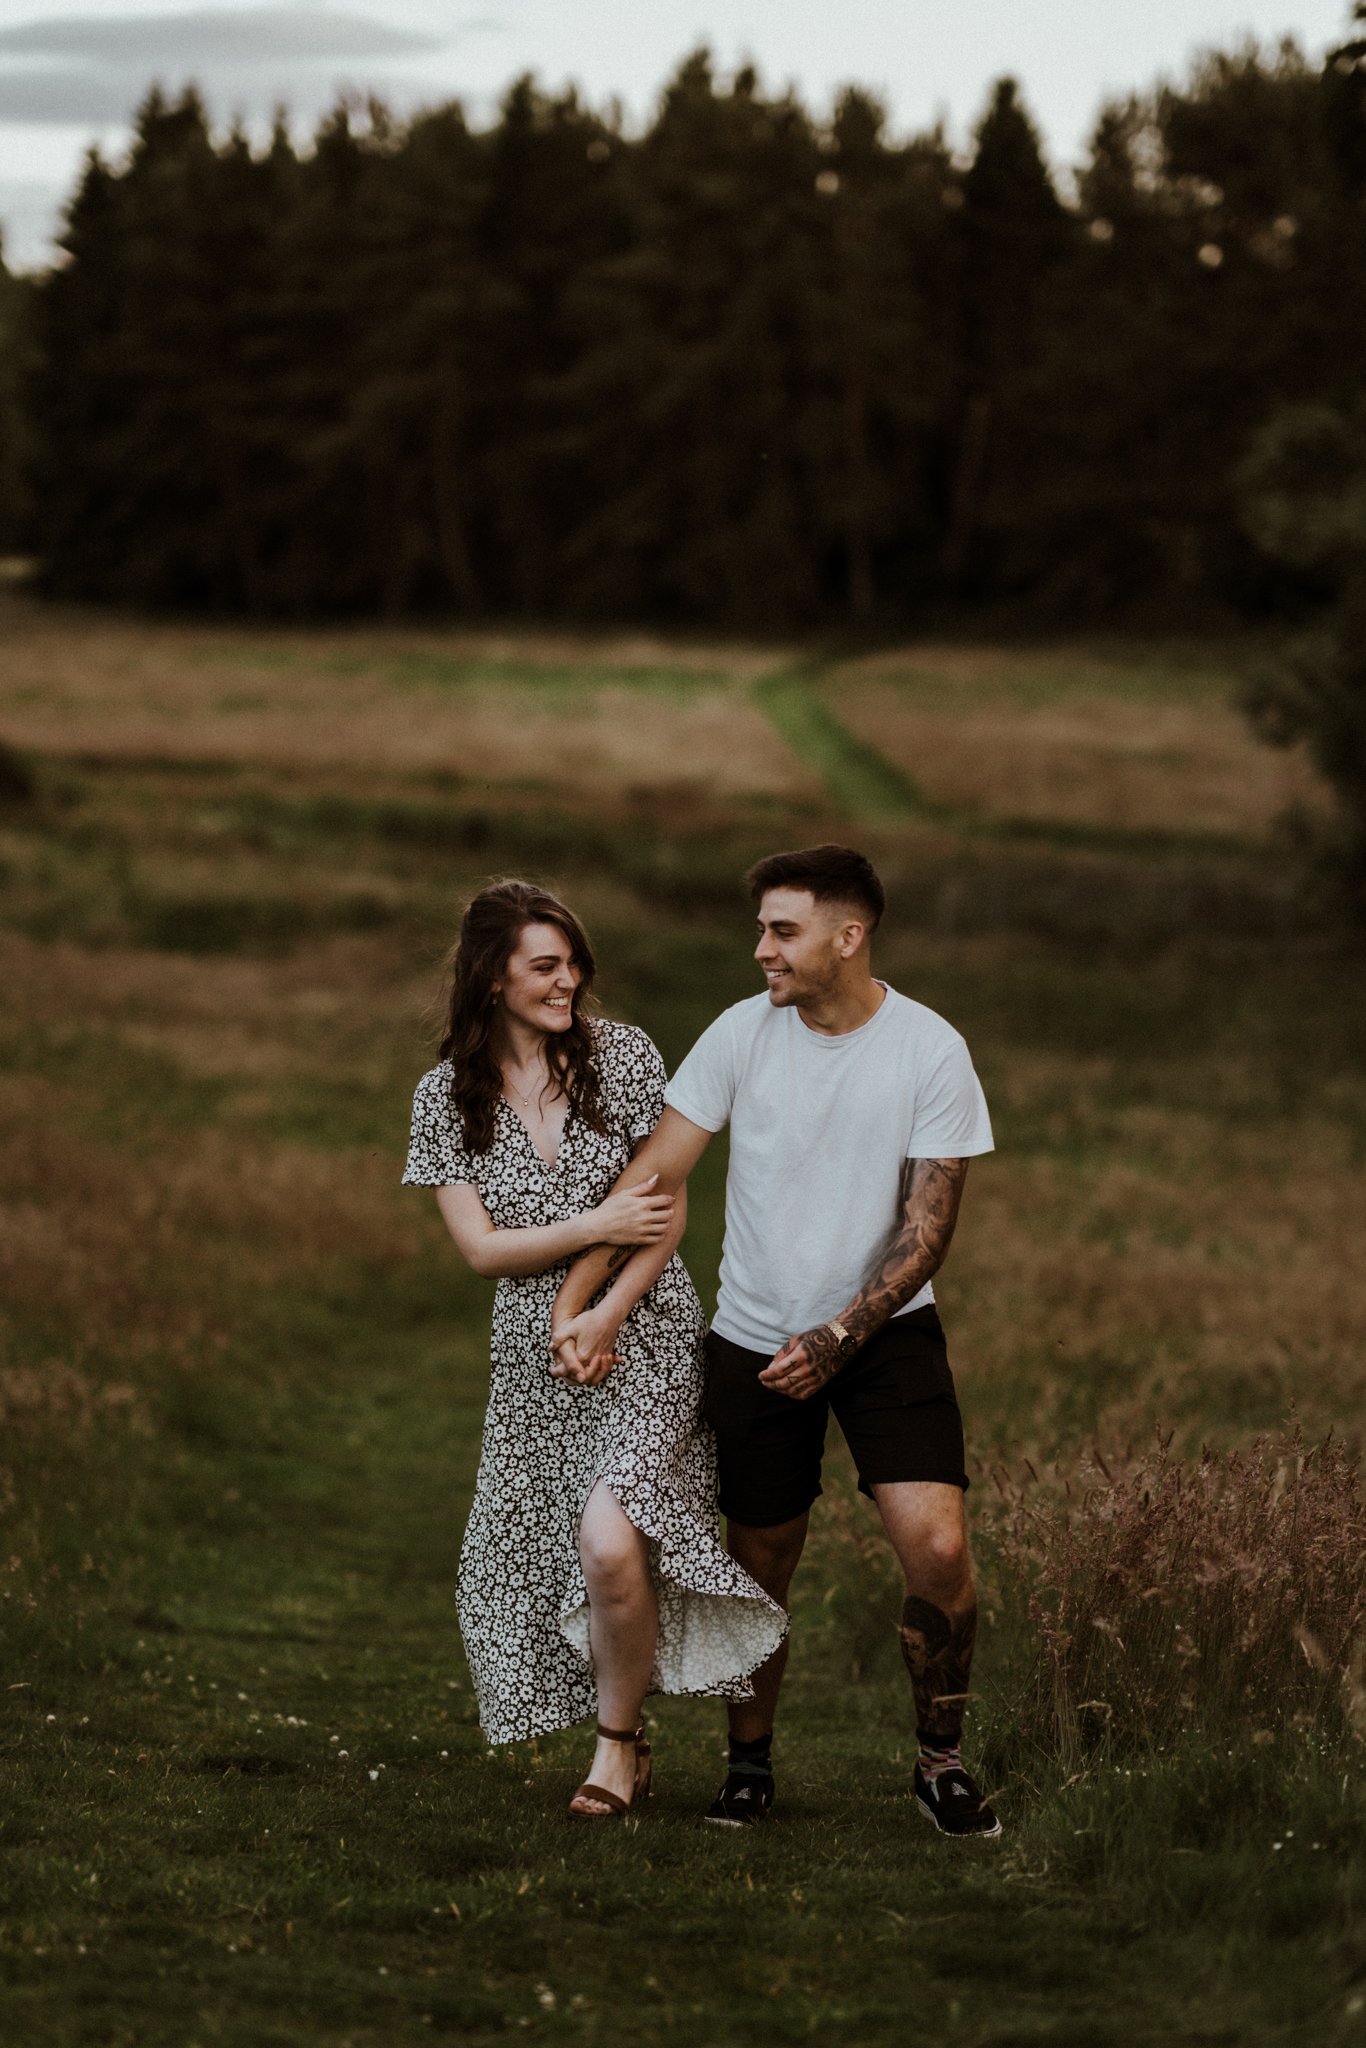 Angus Scotland Engagement and Wedding Photographer - Emily and Gabriel - Adventure Couple Session84.jpg